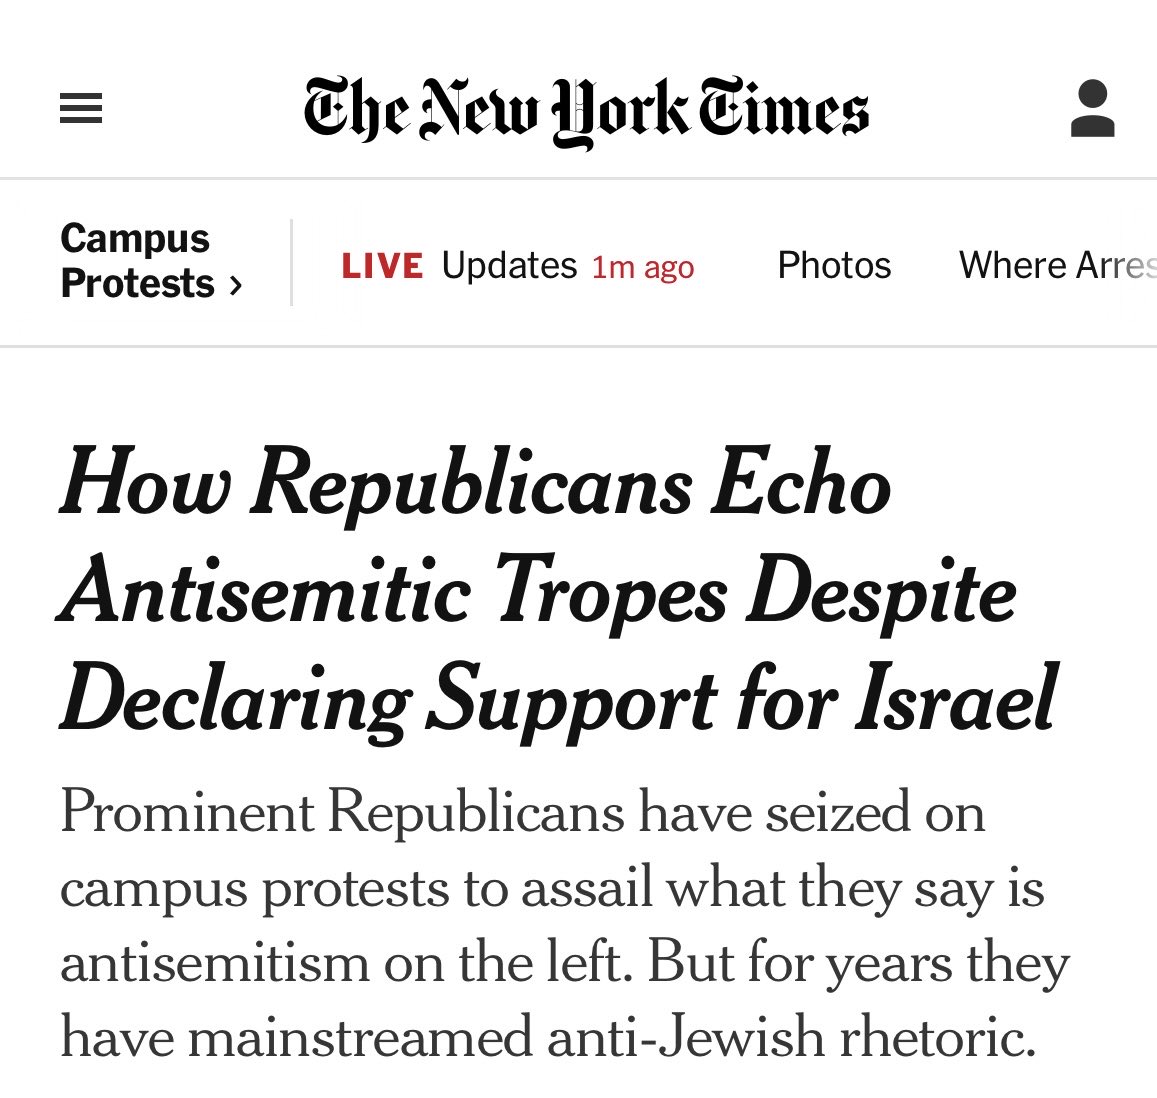 The New York Times and many other Democrats still do not get it. Who gives a shit about “tropes” when most Jewish students aren’t allowed to walk on their college greens?